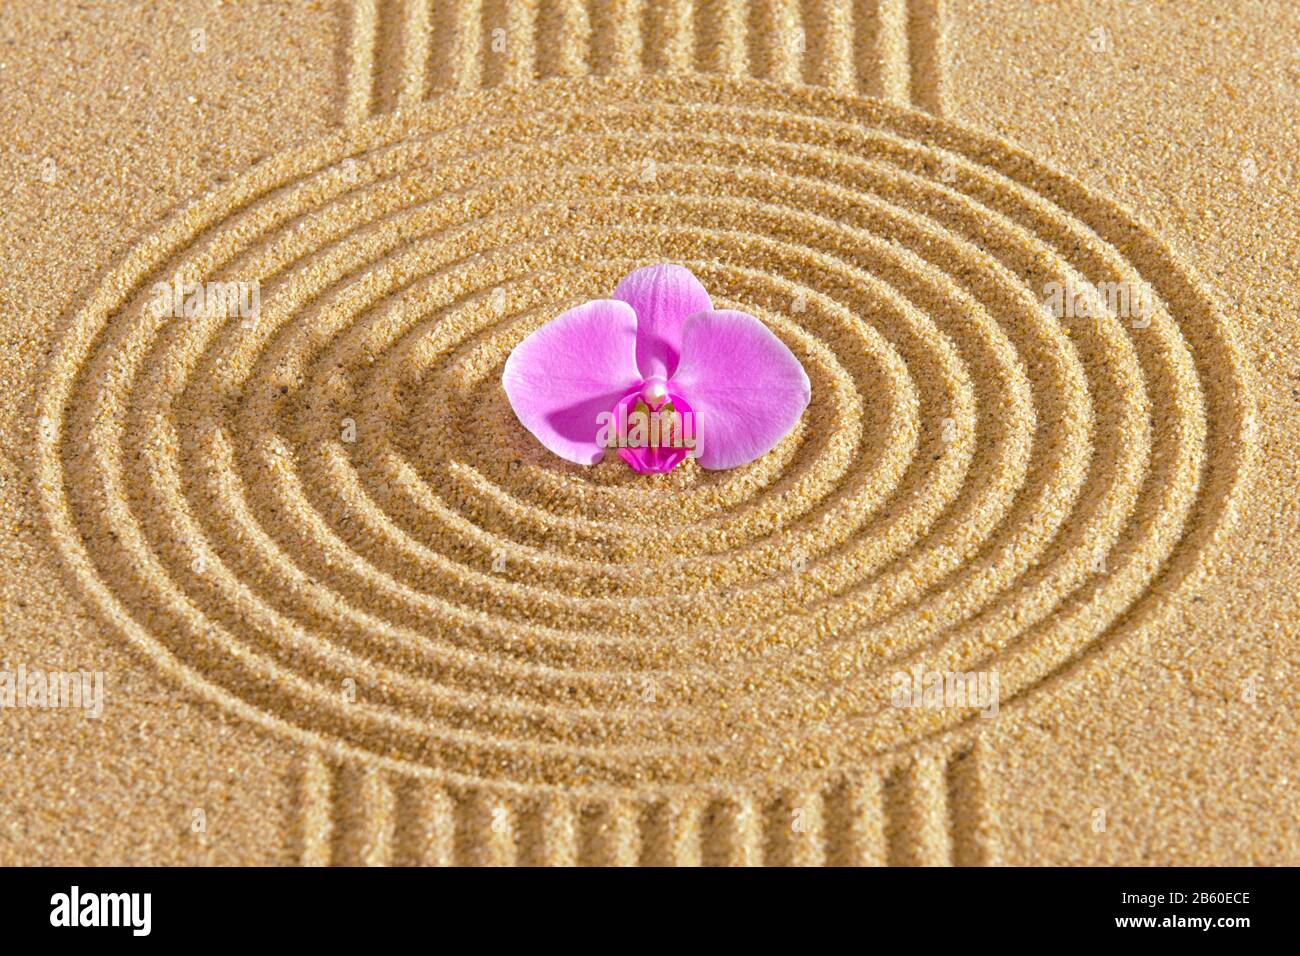 Japanese zen garden with orchid blossom in textured sand Stock Photo